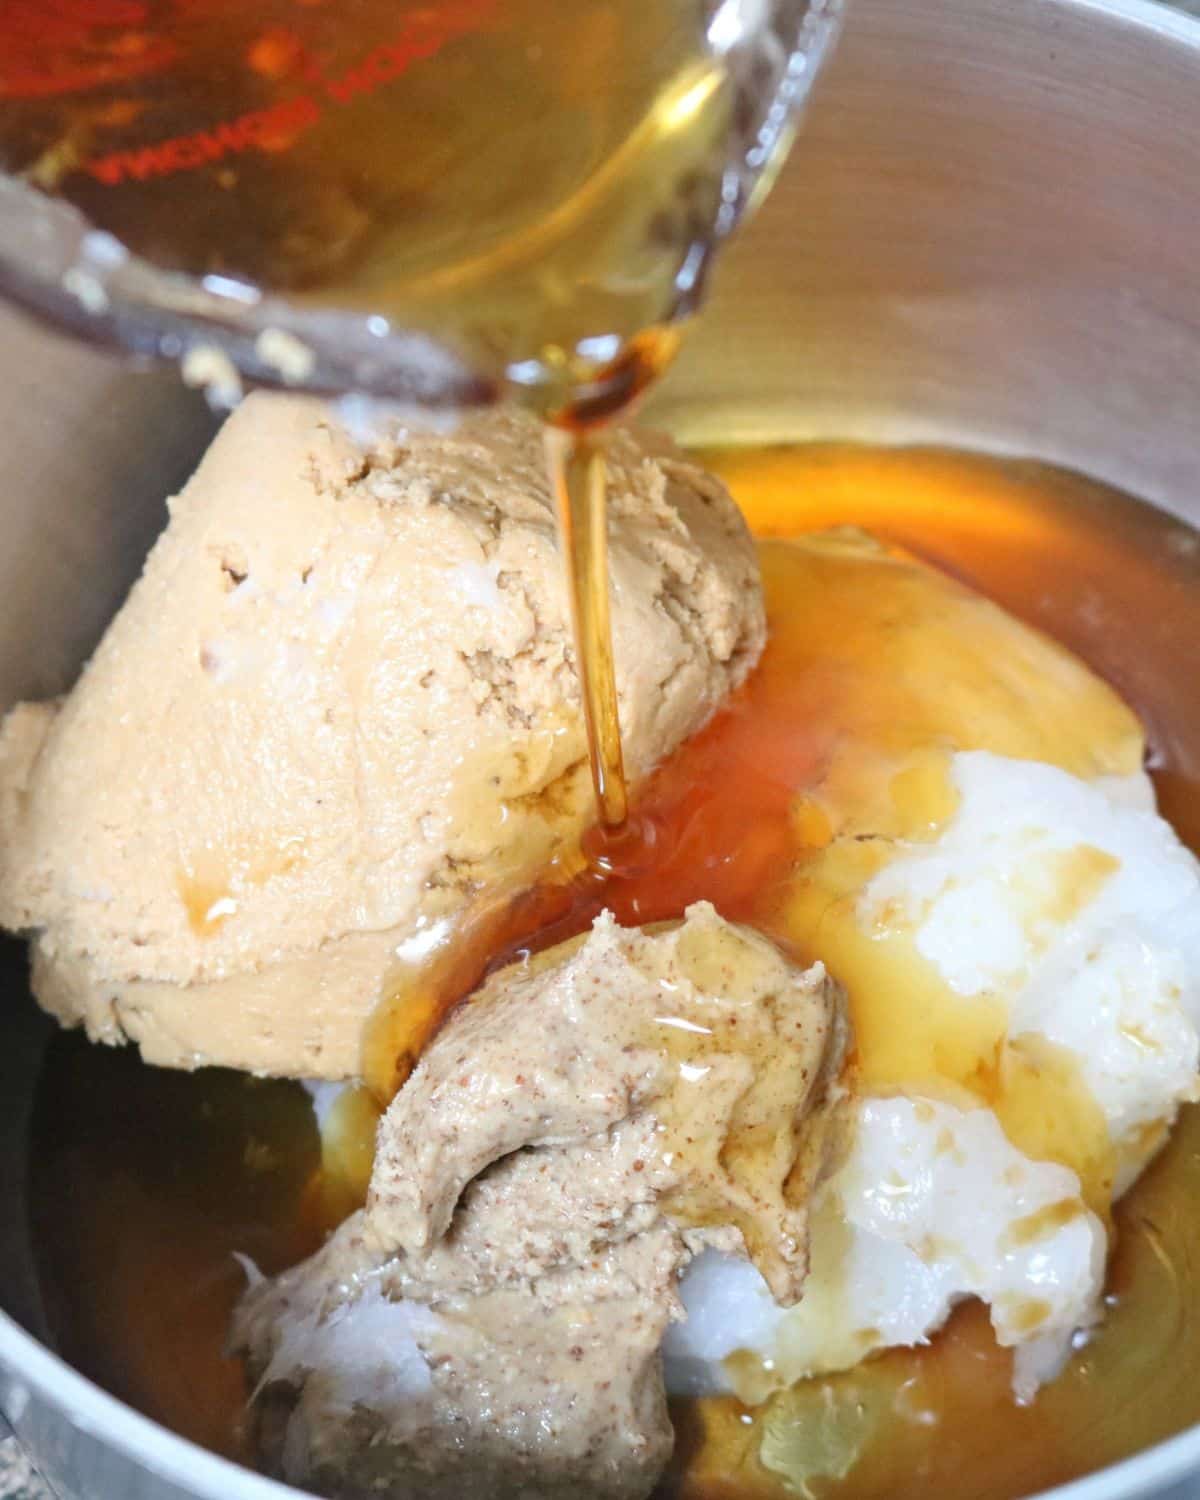 Coconut oil, cashew butter, and maple syrup being poured into a small pot